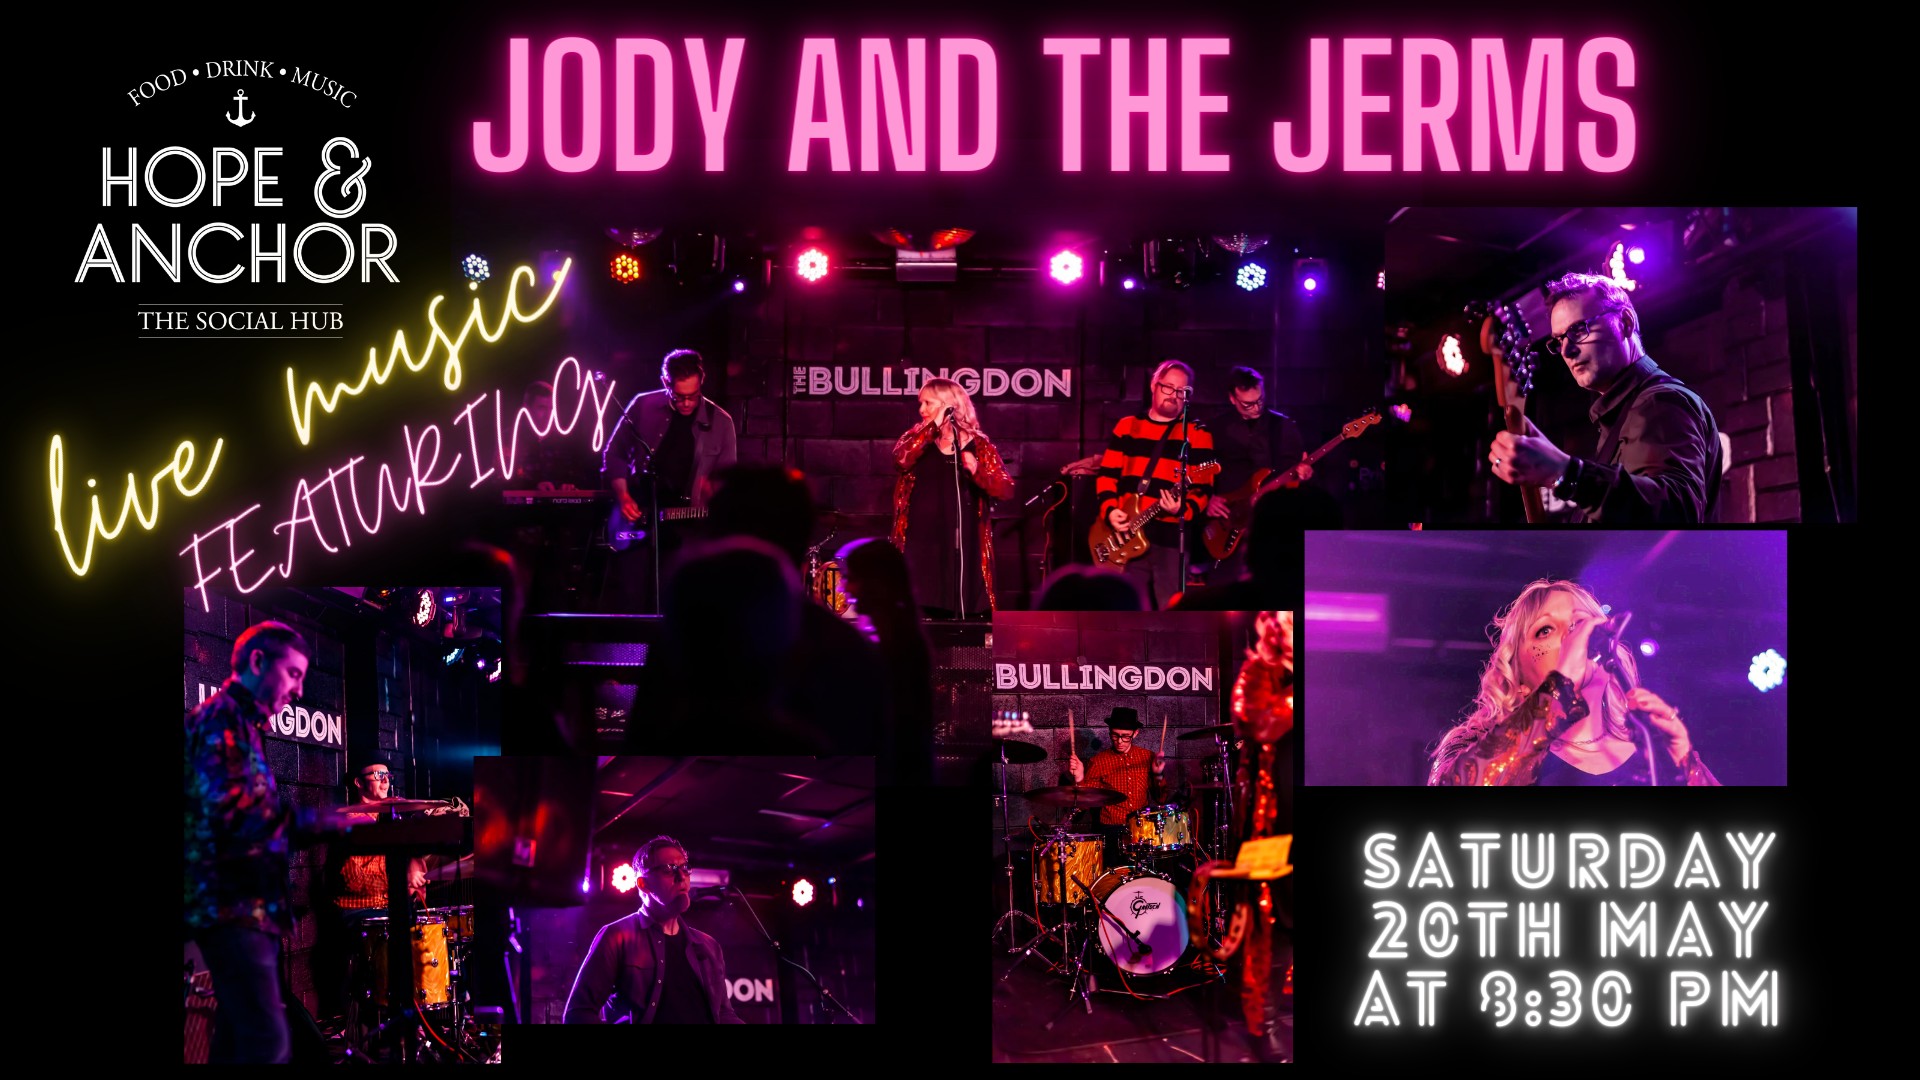 Live music featuring Jody And The Jerms!!